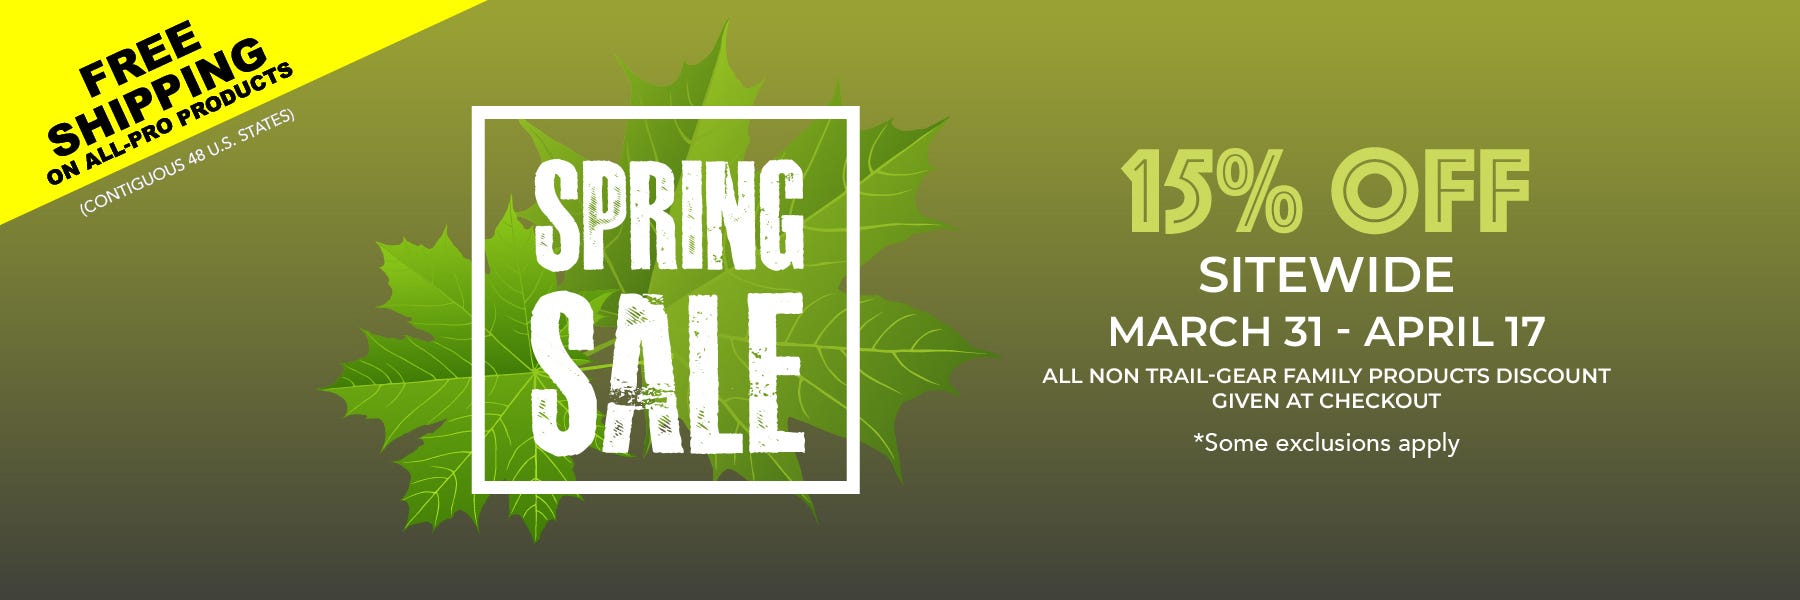 TRAIL-GEAR Spring is in the Air Sale - 15% off